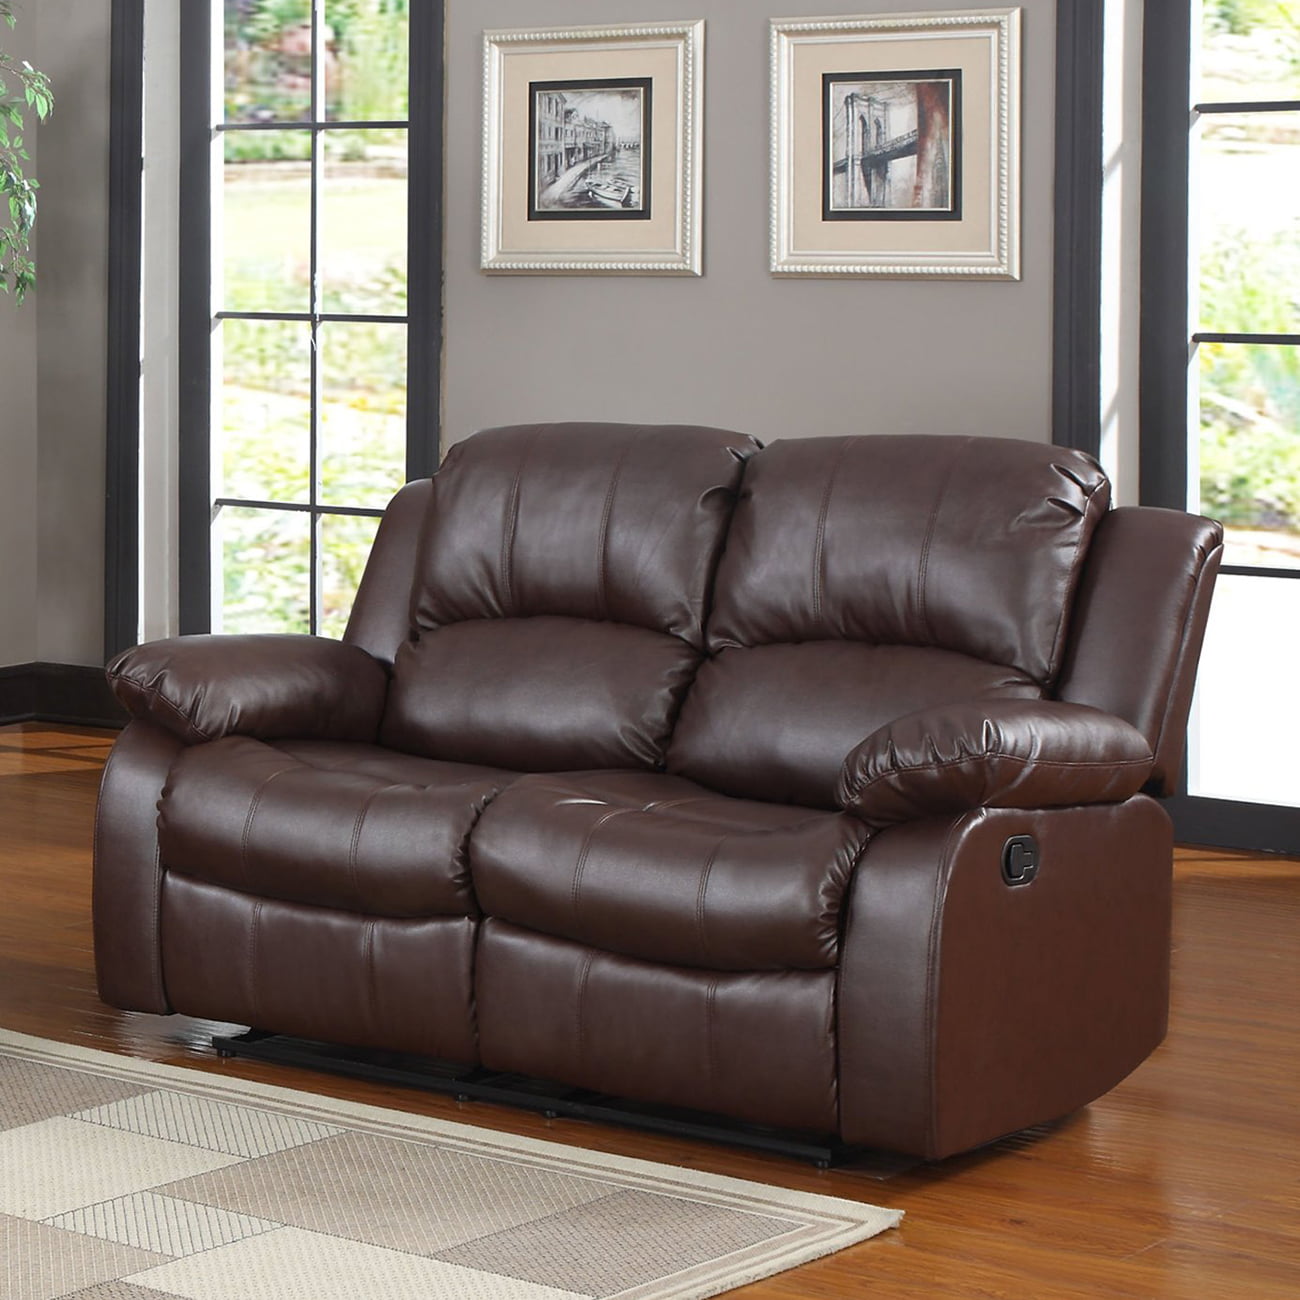 Classic Oversize and Overstuffed 2 Seat Bonded Leather Double Recliner ...